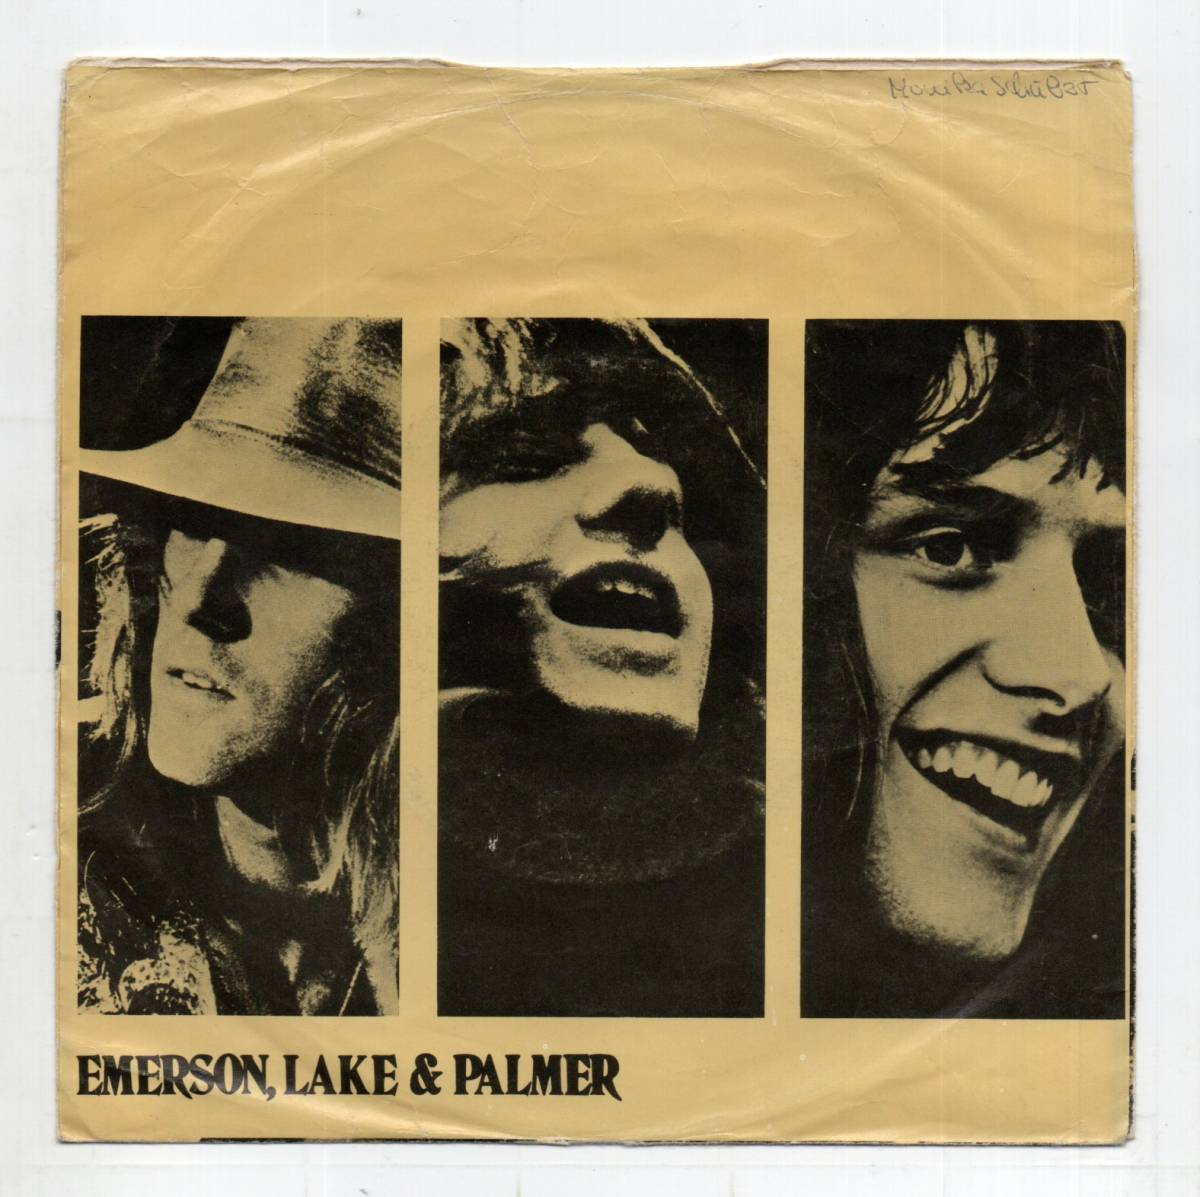 Emerson, Lake & Palmer - Lucky Man / Knife-Edge (7inch) Island Records 10203 AT_画像2